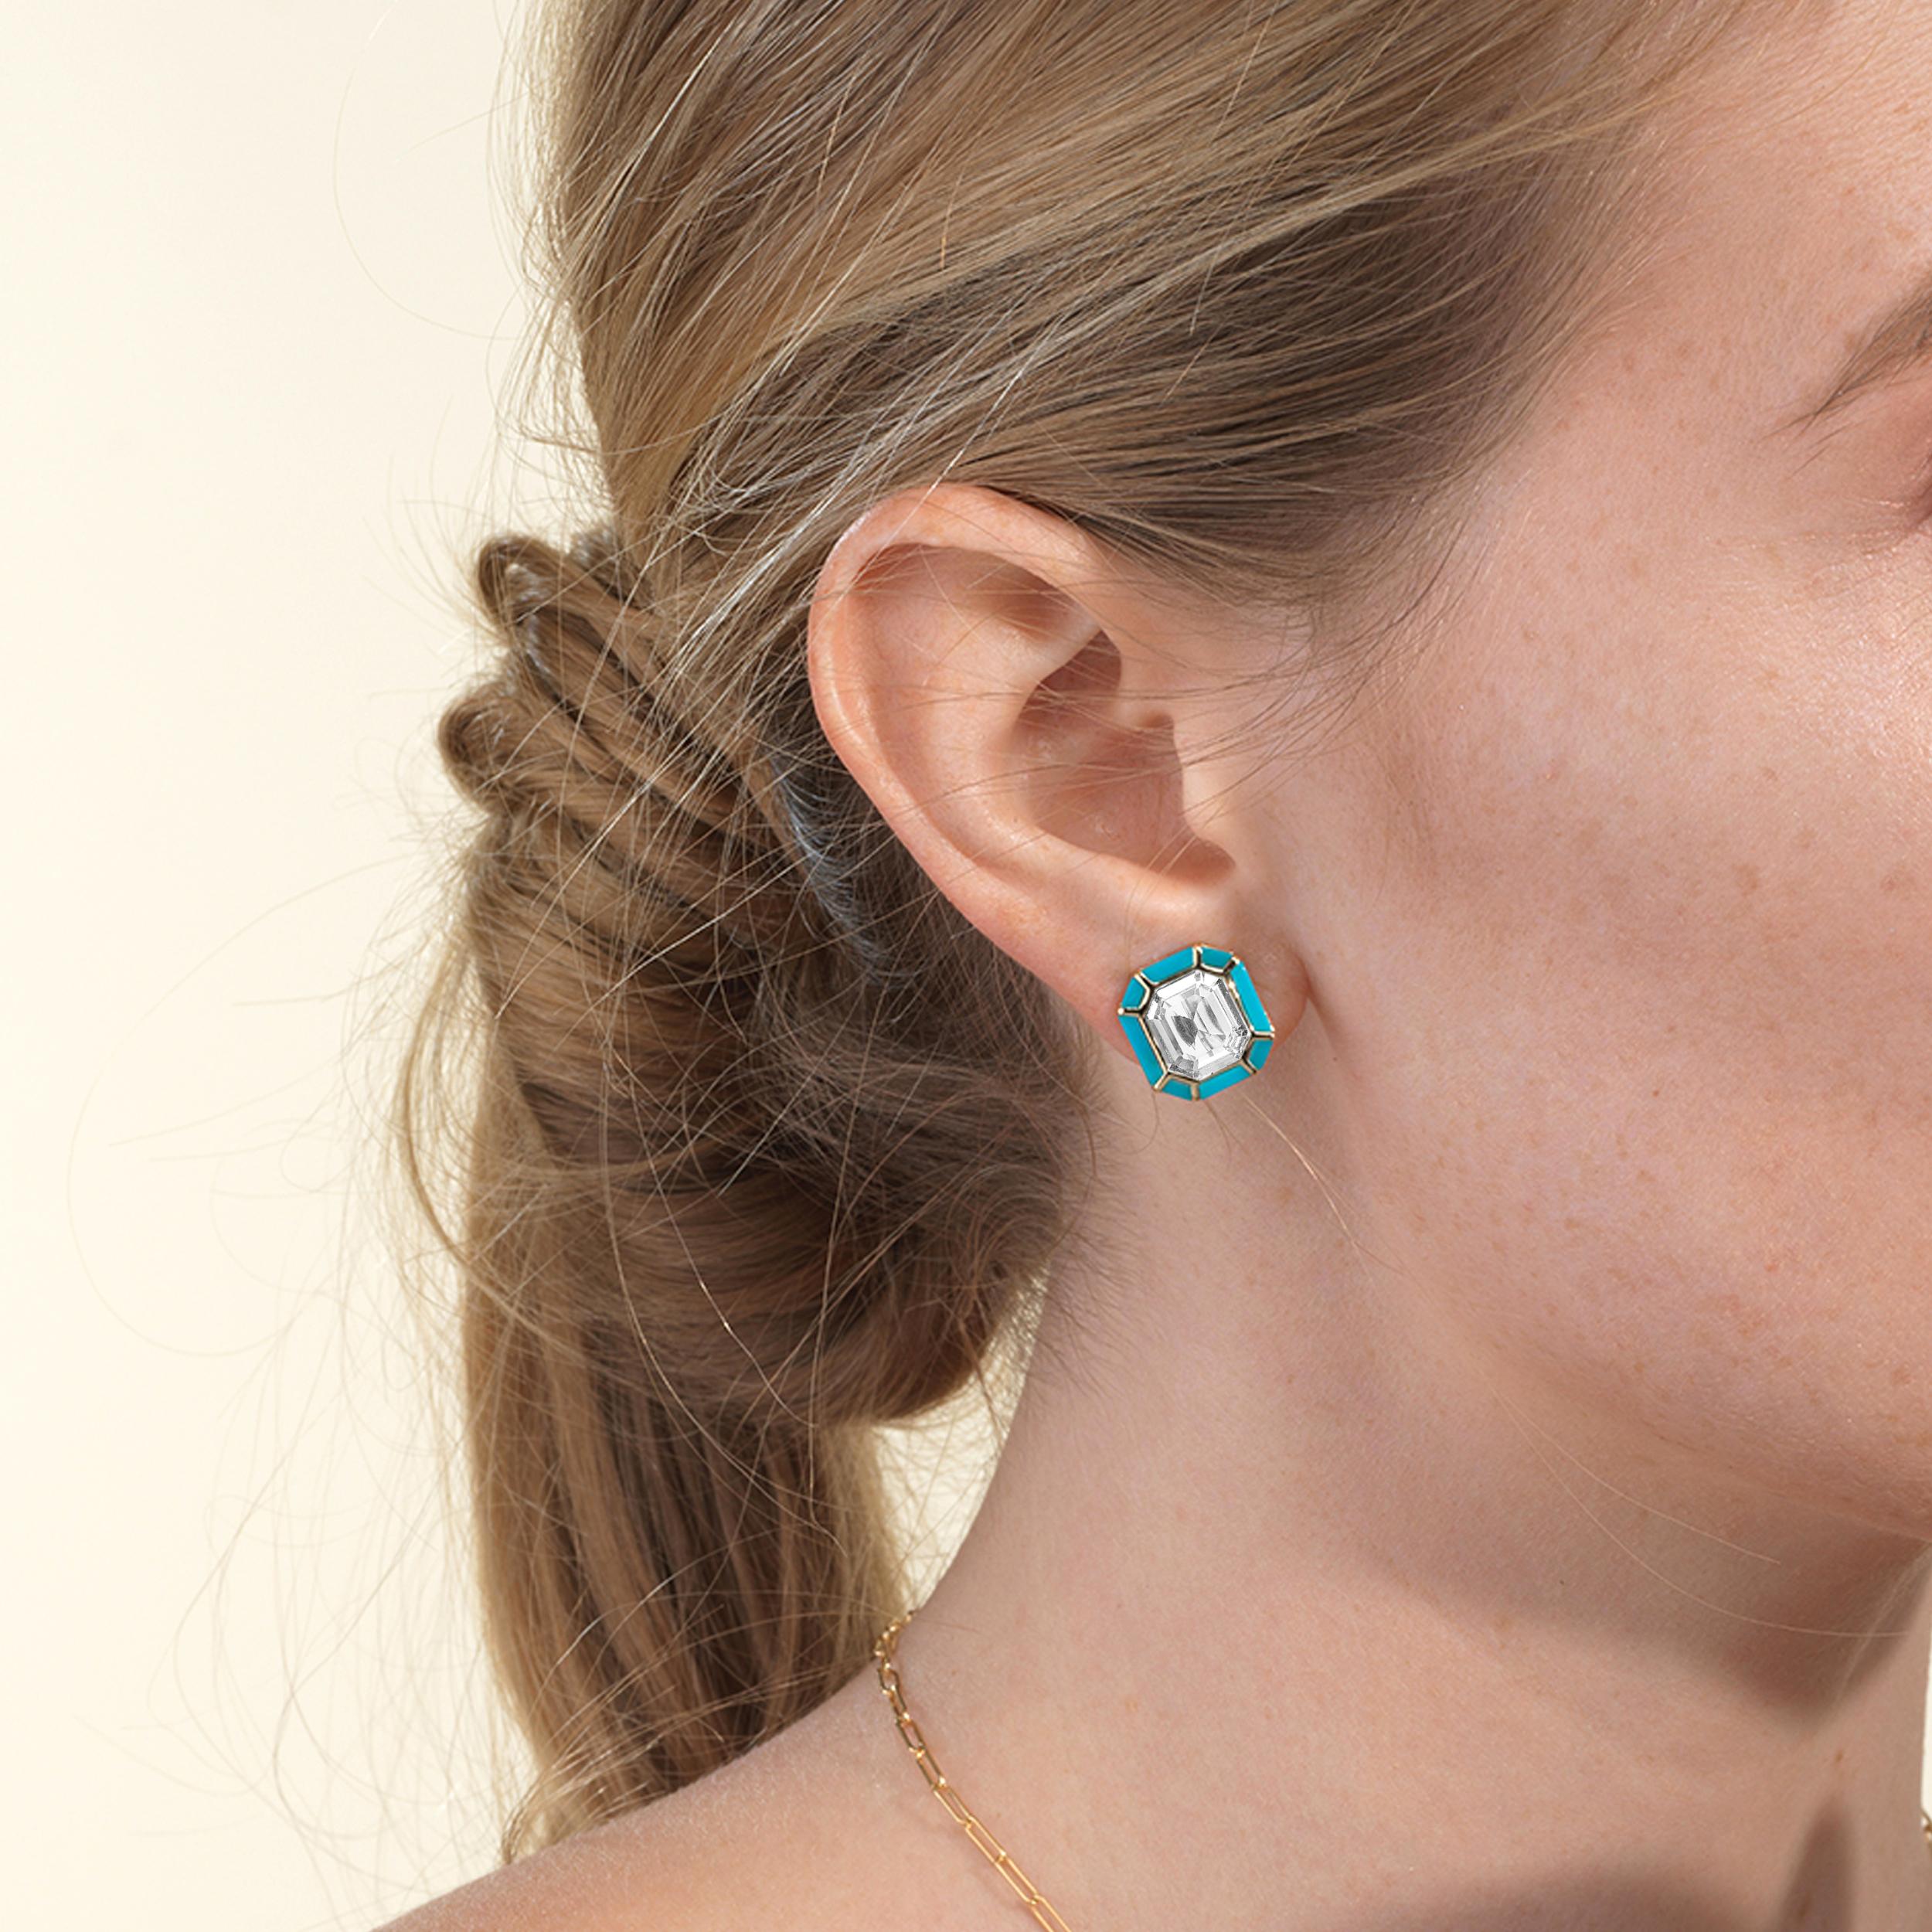 The Rock Crystal & Turquoise Stud Earrings from the 'Melange' Collection showcase a captivating blend of elegance and charm. Crafted with exquisite attention to detail, these earrings feature stunning emerald cut Rock Crystal and Turquoise gemstones